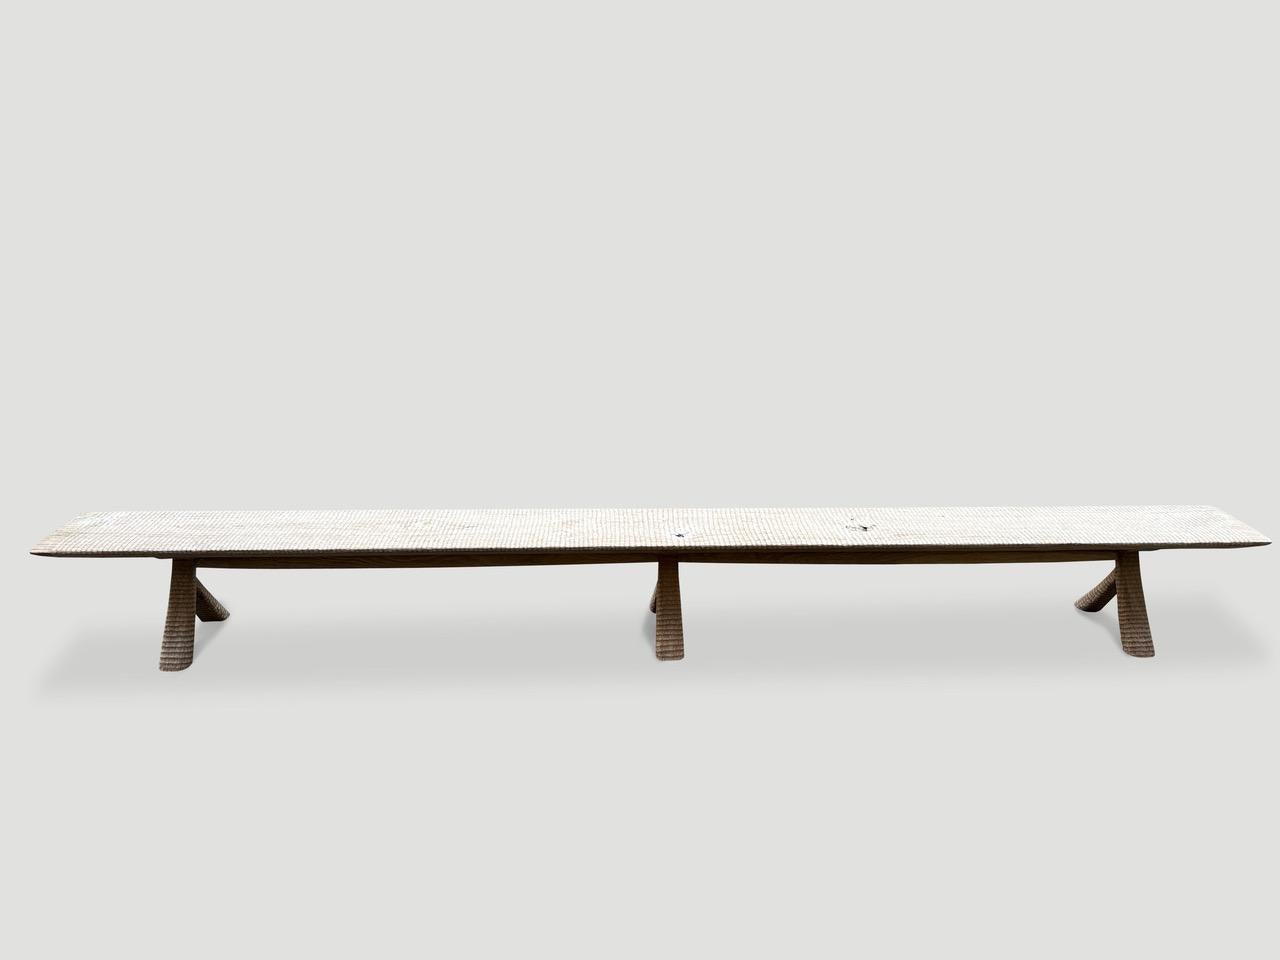 A beautiful thick panel of rare teak wood, taken from my finest collection was meticulously hand carved by our master carver to produce this impressive bench for our Mid- Century Couture Collection. We added a translucent bone stain revealing the